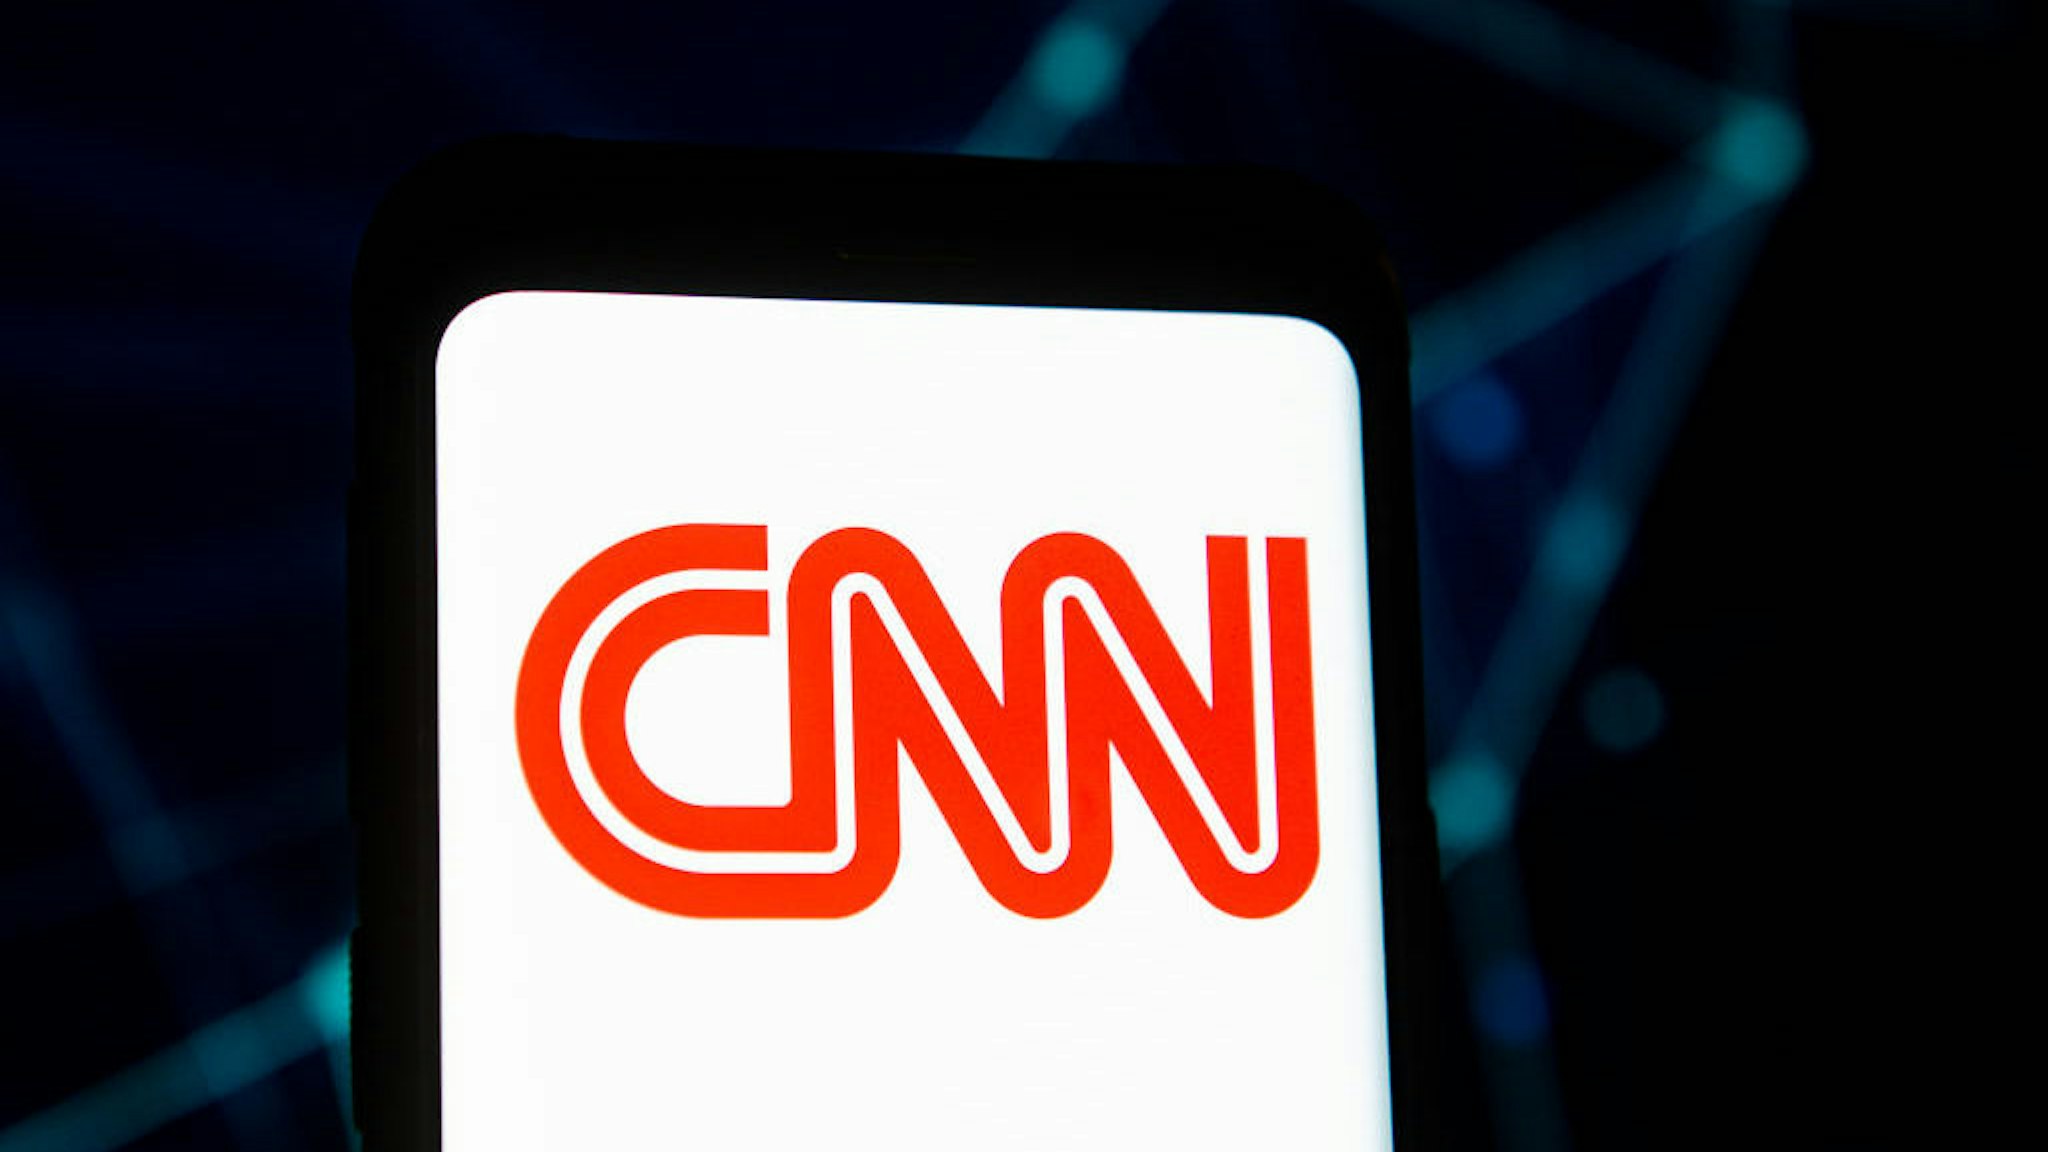 POLAND - 2020/03/23: In this photo illustration a CNN logo seen displayed on a smartphone. (Photo Illustration by Mateusz Slodkowski/SOPA Images/LightRocket via Getty Images)